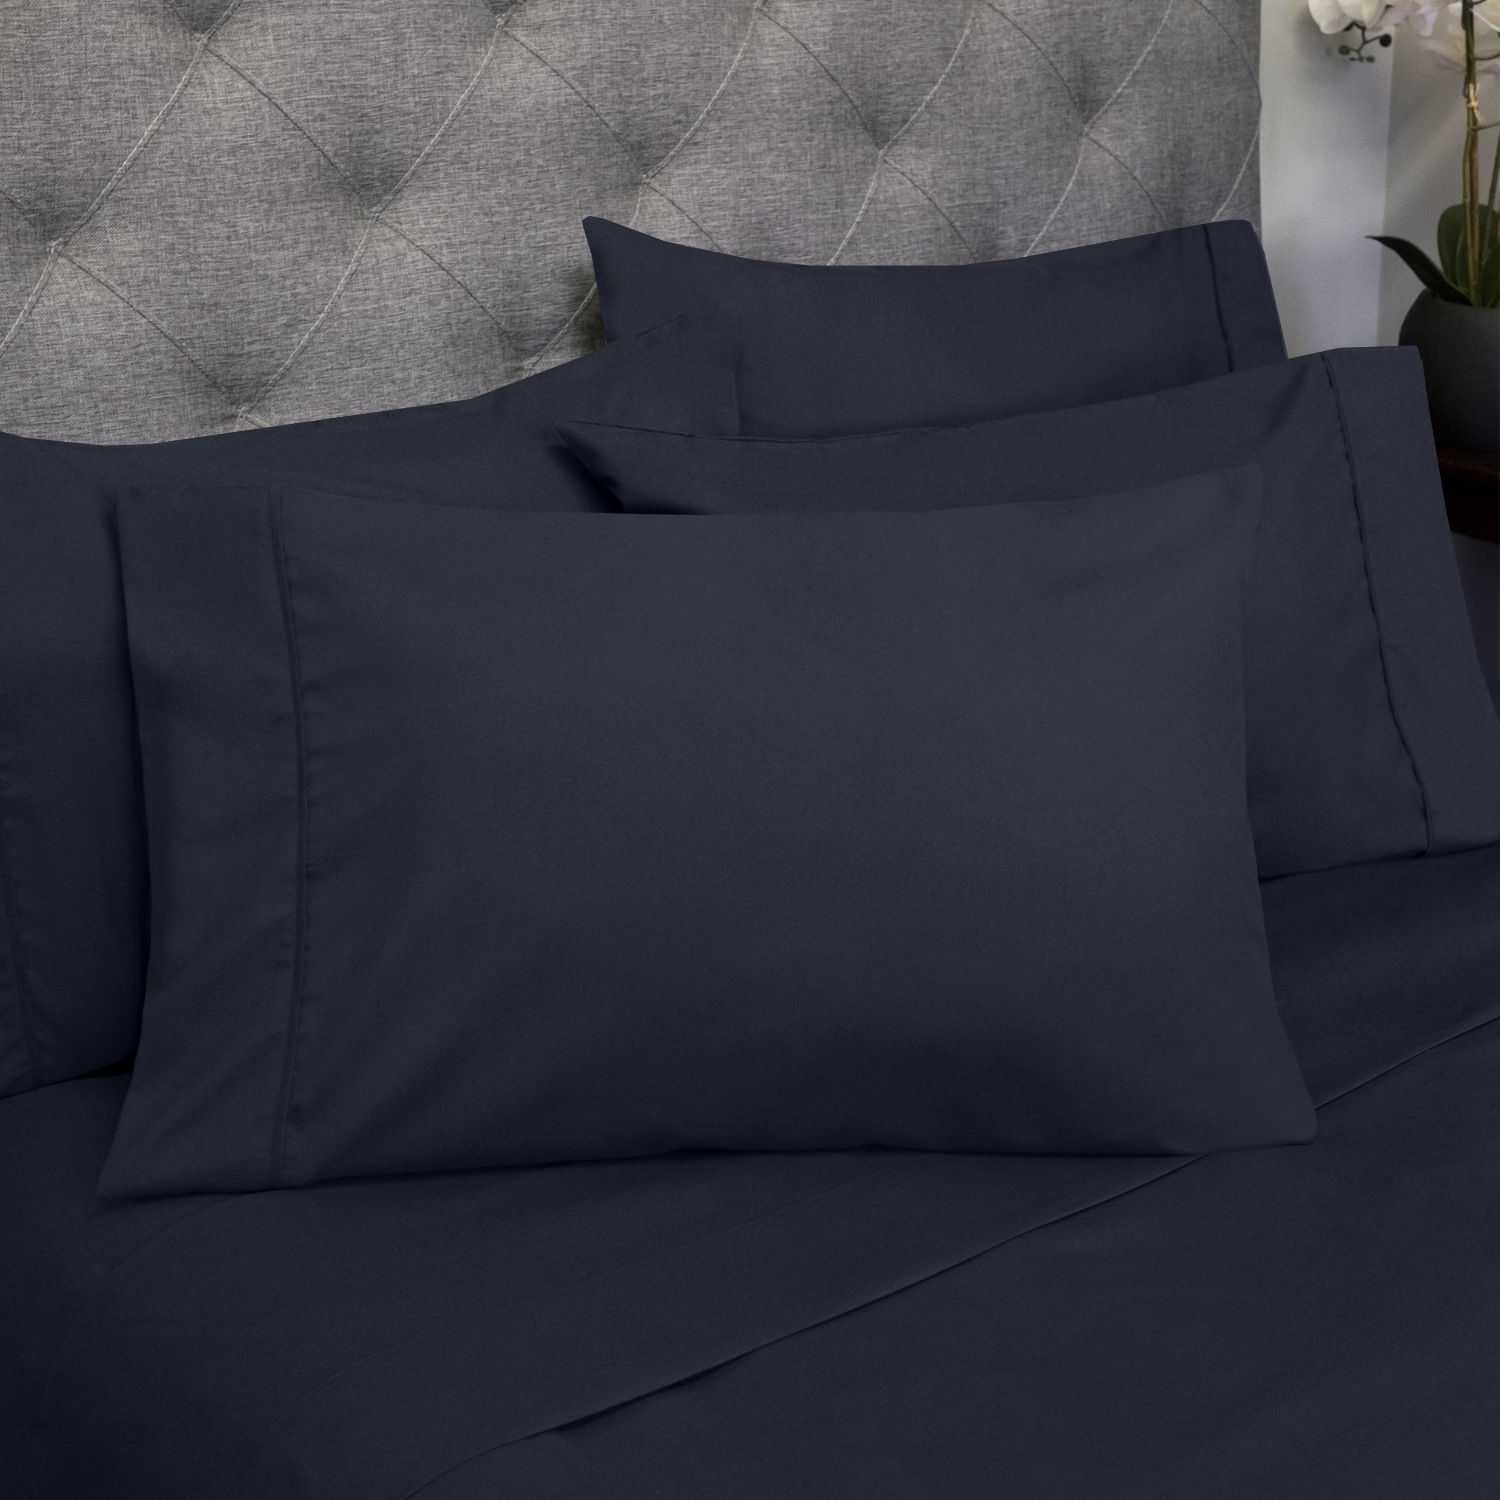 Details about  / 5 PC Split Sheet Set All Sizes /& White Solid 1000 Thread Count Egyptian Cotton